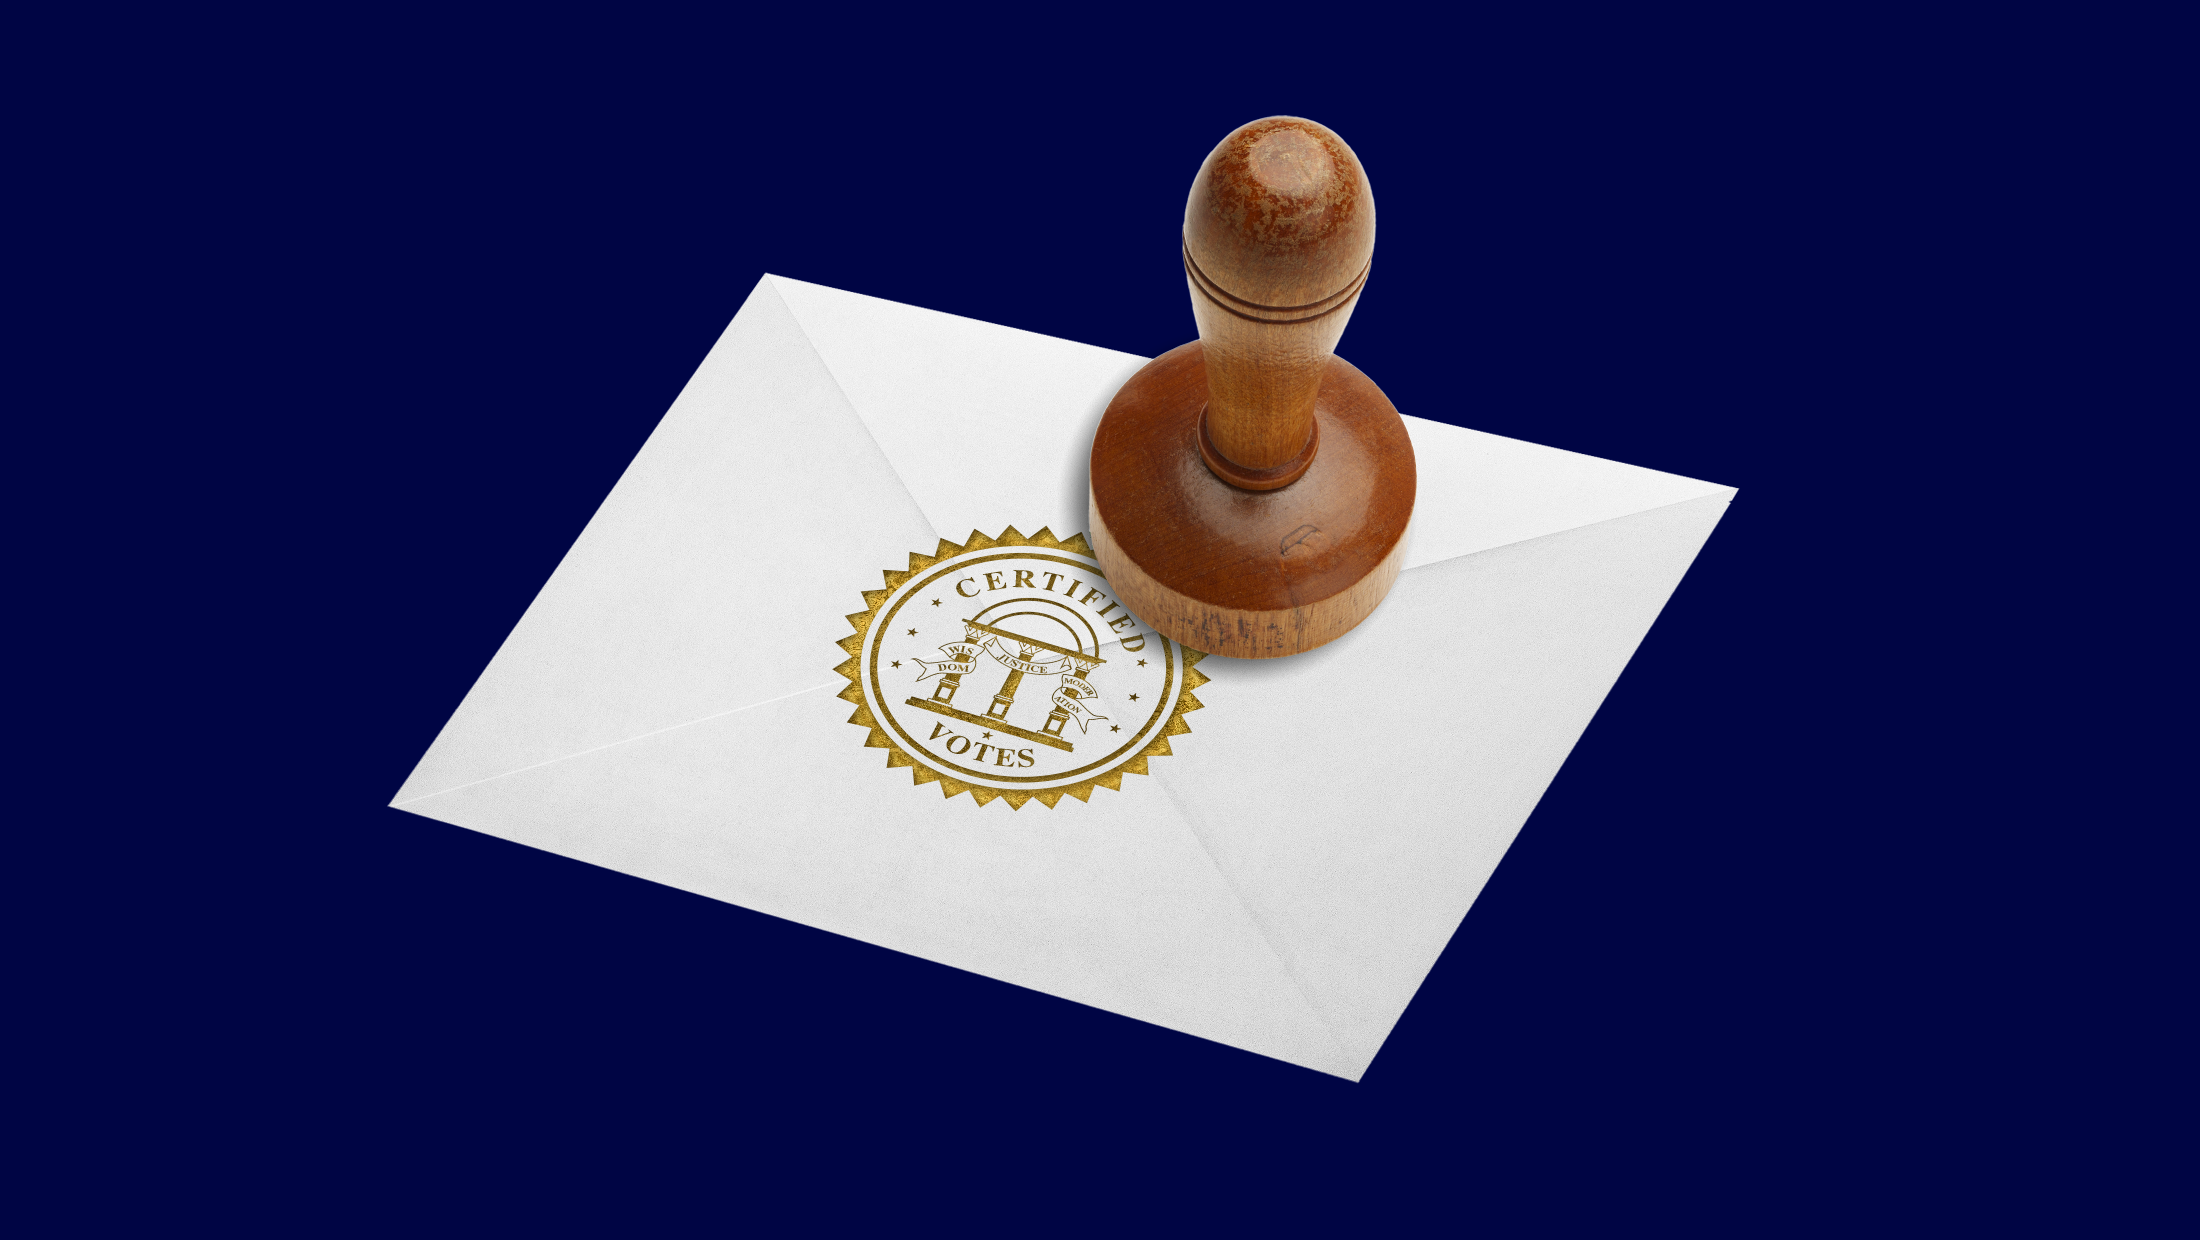 A wooden stamper embossing a white envelope with a gold seal that says "CERTIFIED VOTES"